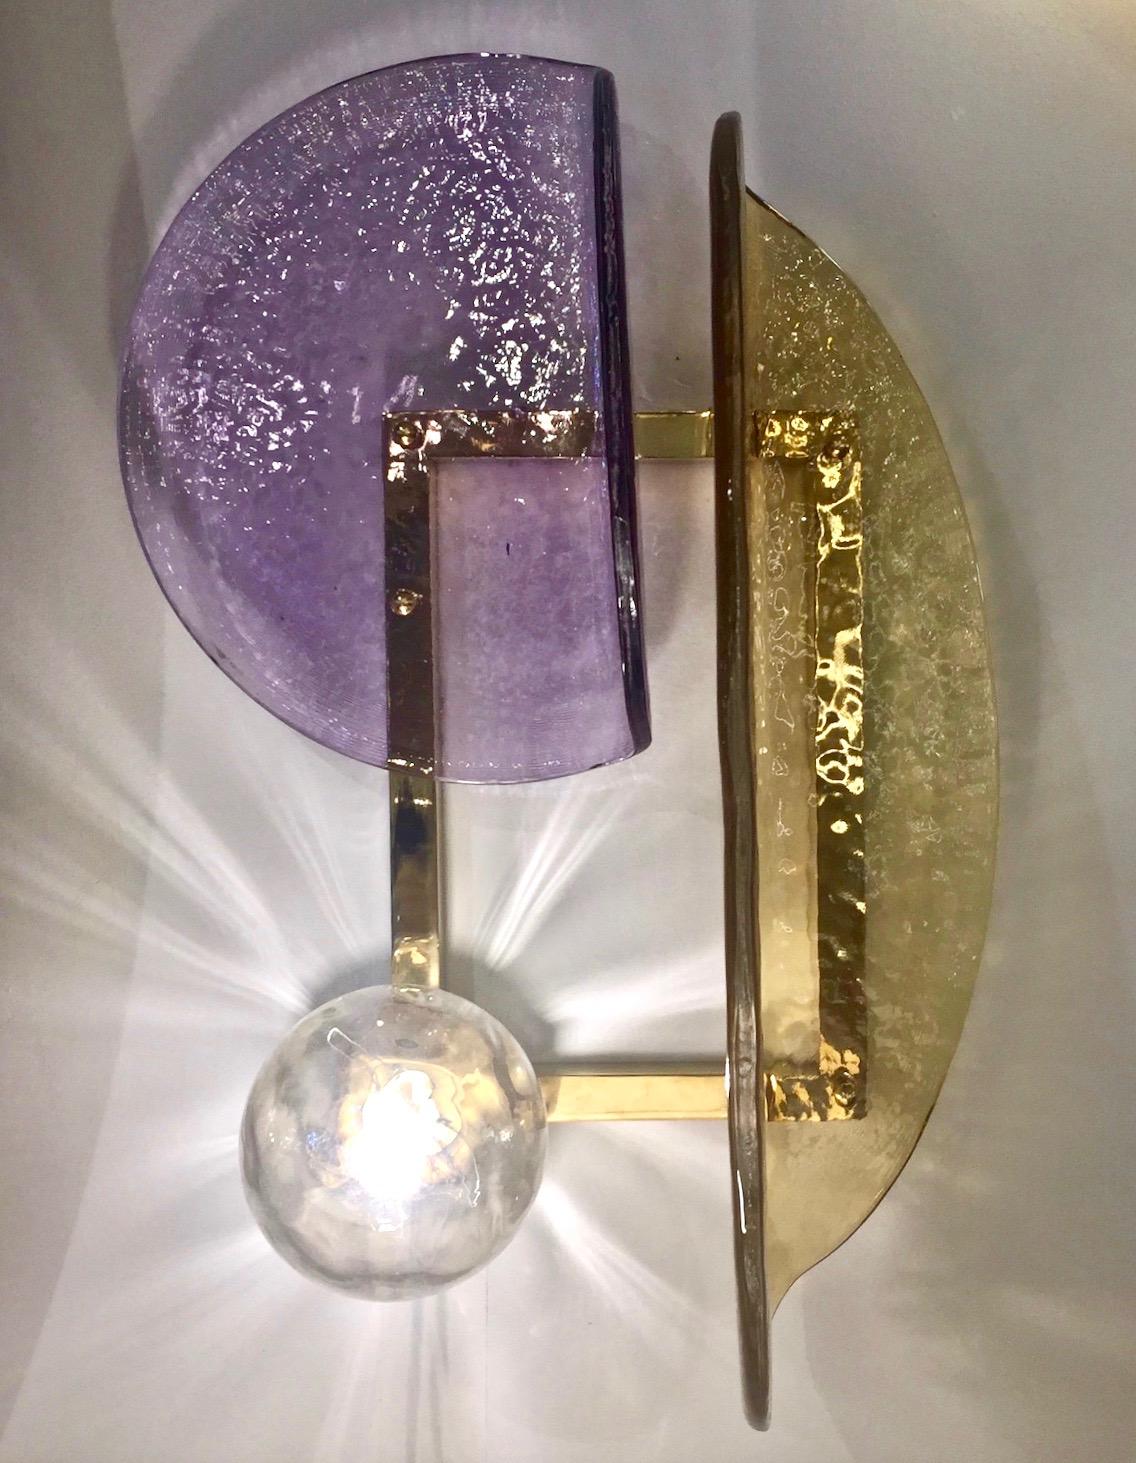 One sconce is available now - A contemporary creation with a unique modern geometric design, this wall light is entirely handcrafted in Italy. The molded textured glass elements of organic rounded shape, in amber gold and purple violet Murano glass,